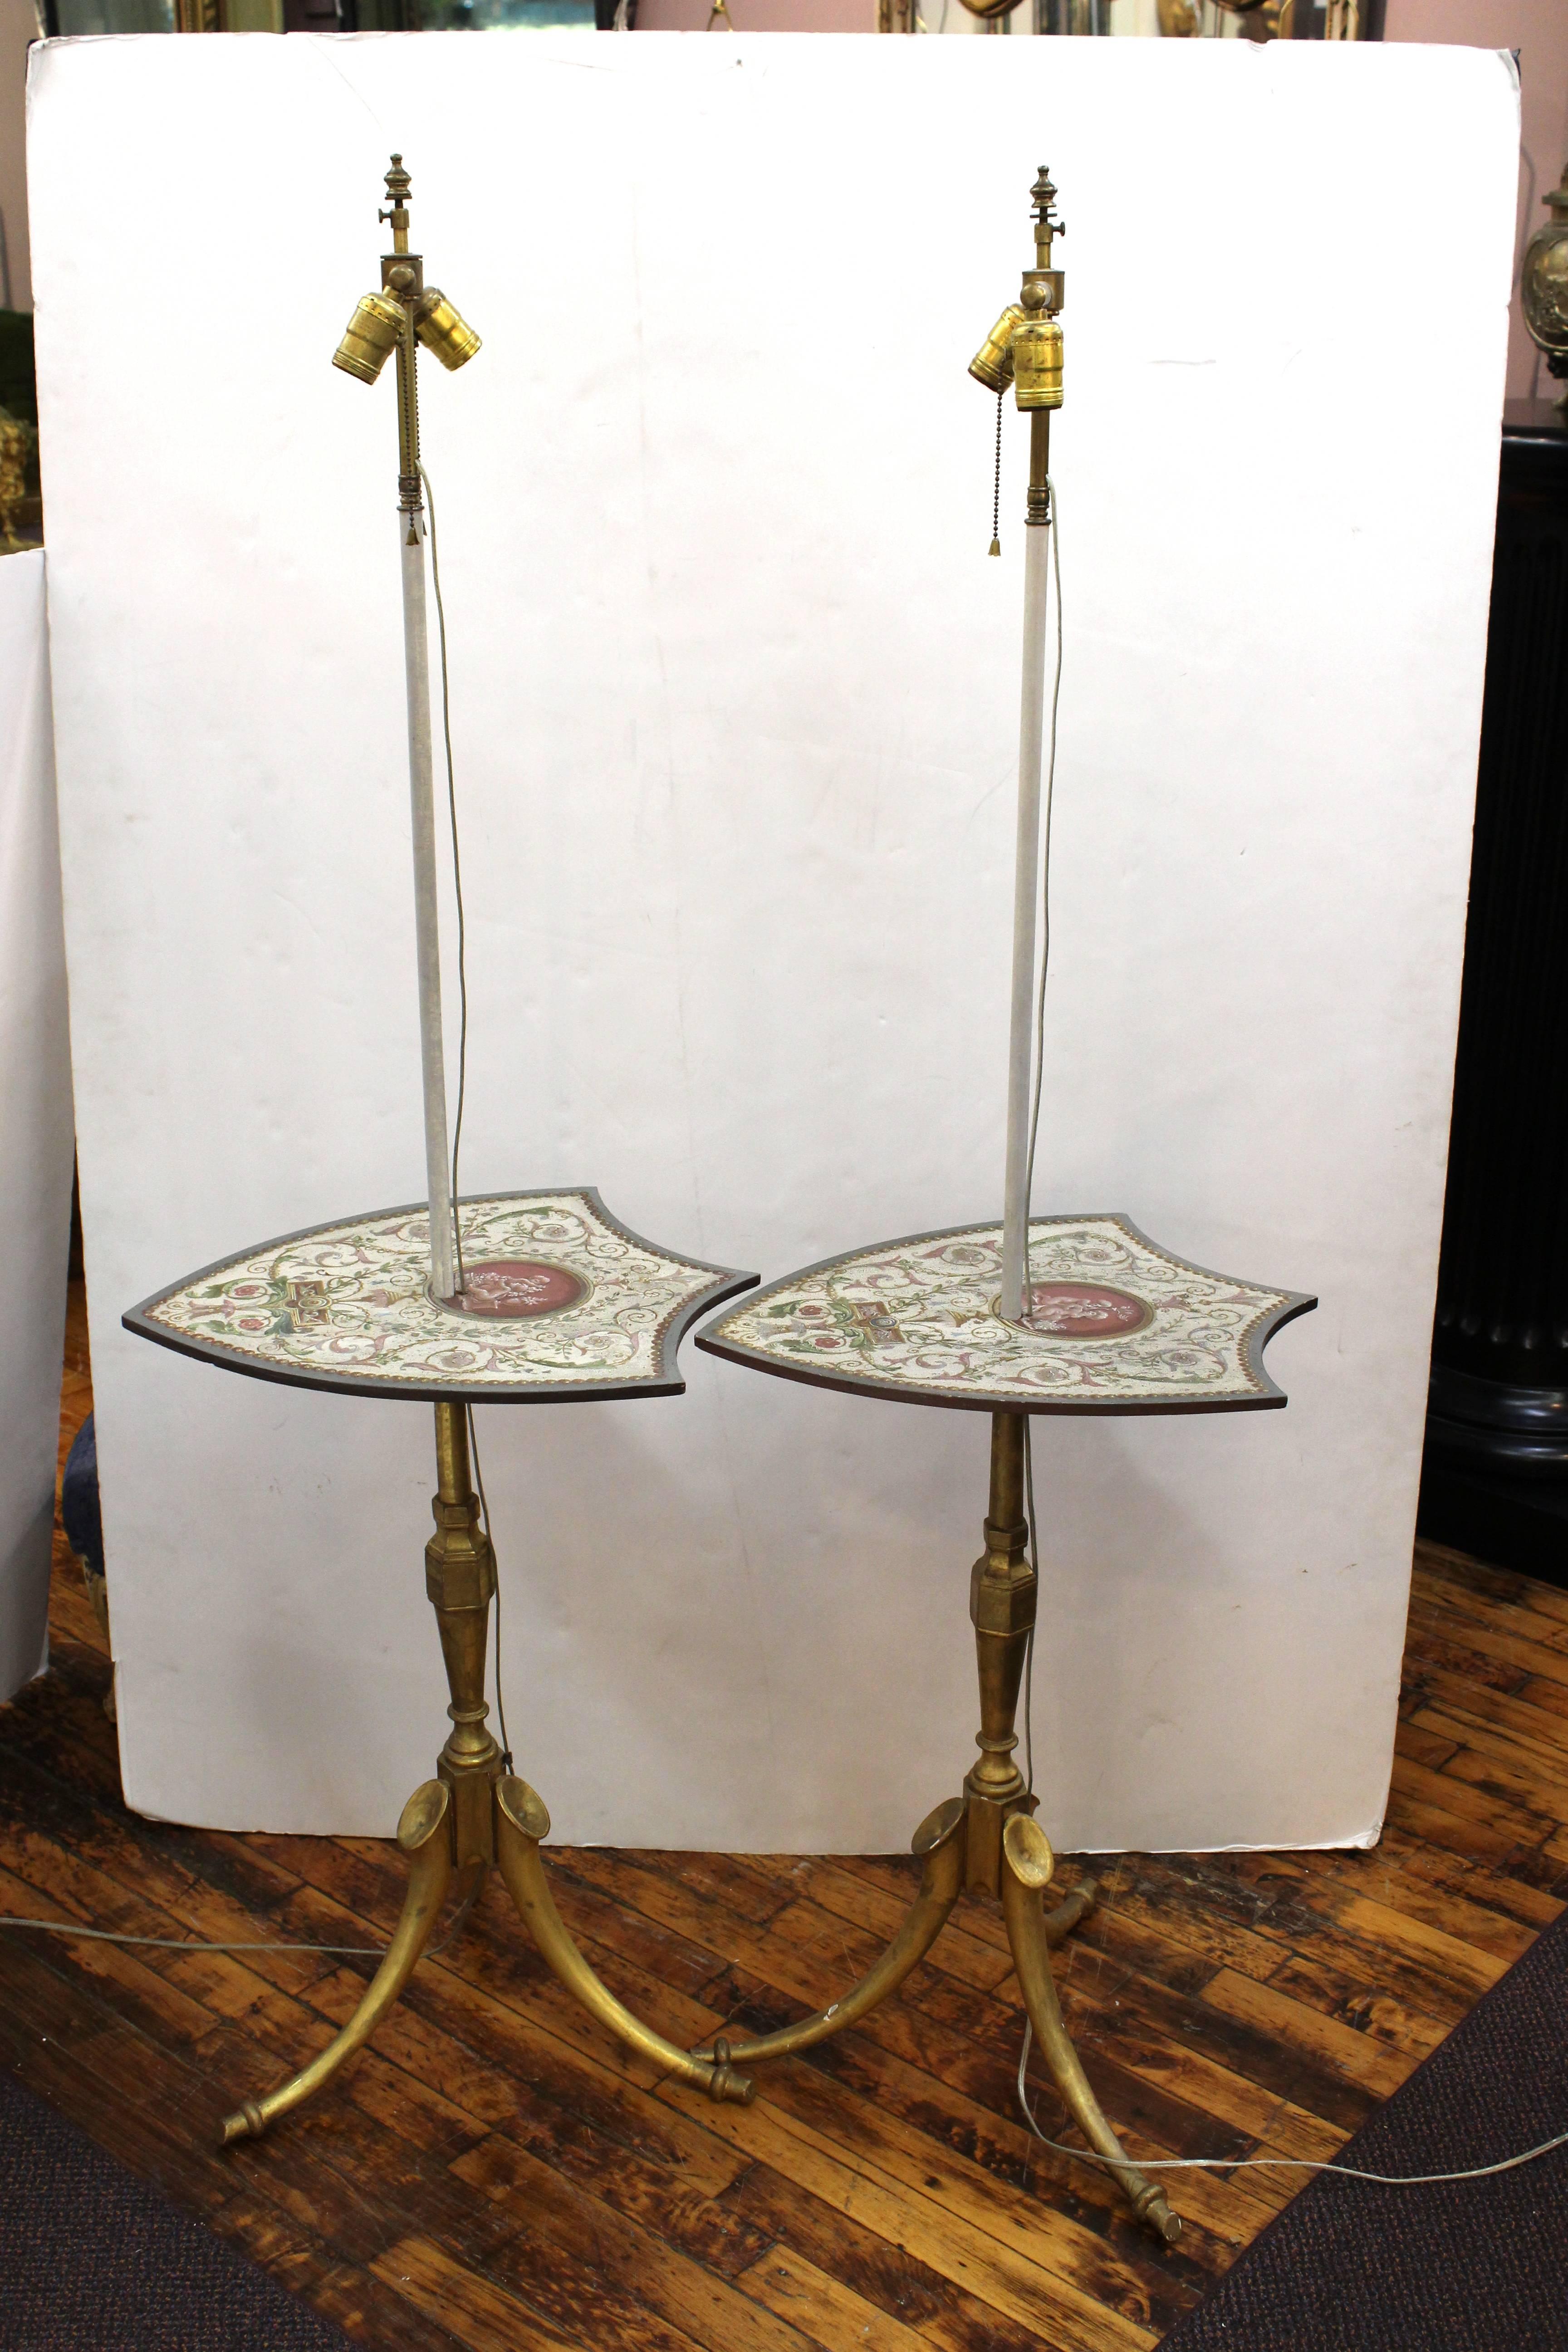 A pair of floor lamps crafted from antique shield shaped firescreens; possibly of Russian origin. The shields are painted with scrolls, flowers and putti. Each lamp stands on a giltwood tripod base made up of three Horn forms. Some wear appropriate